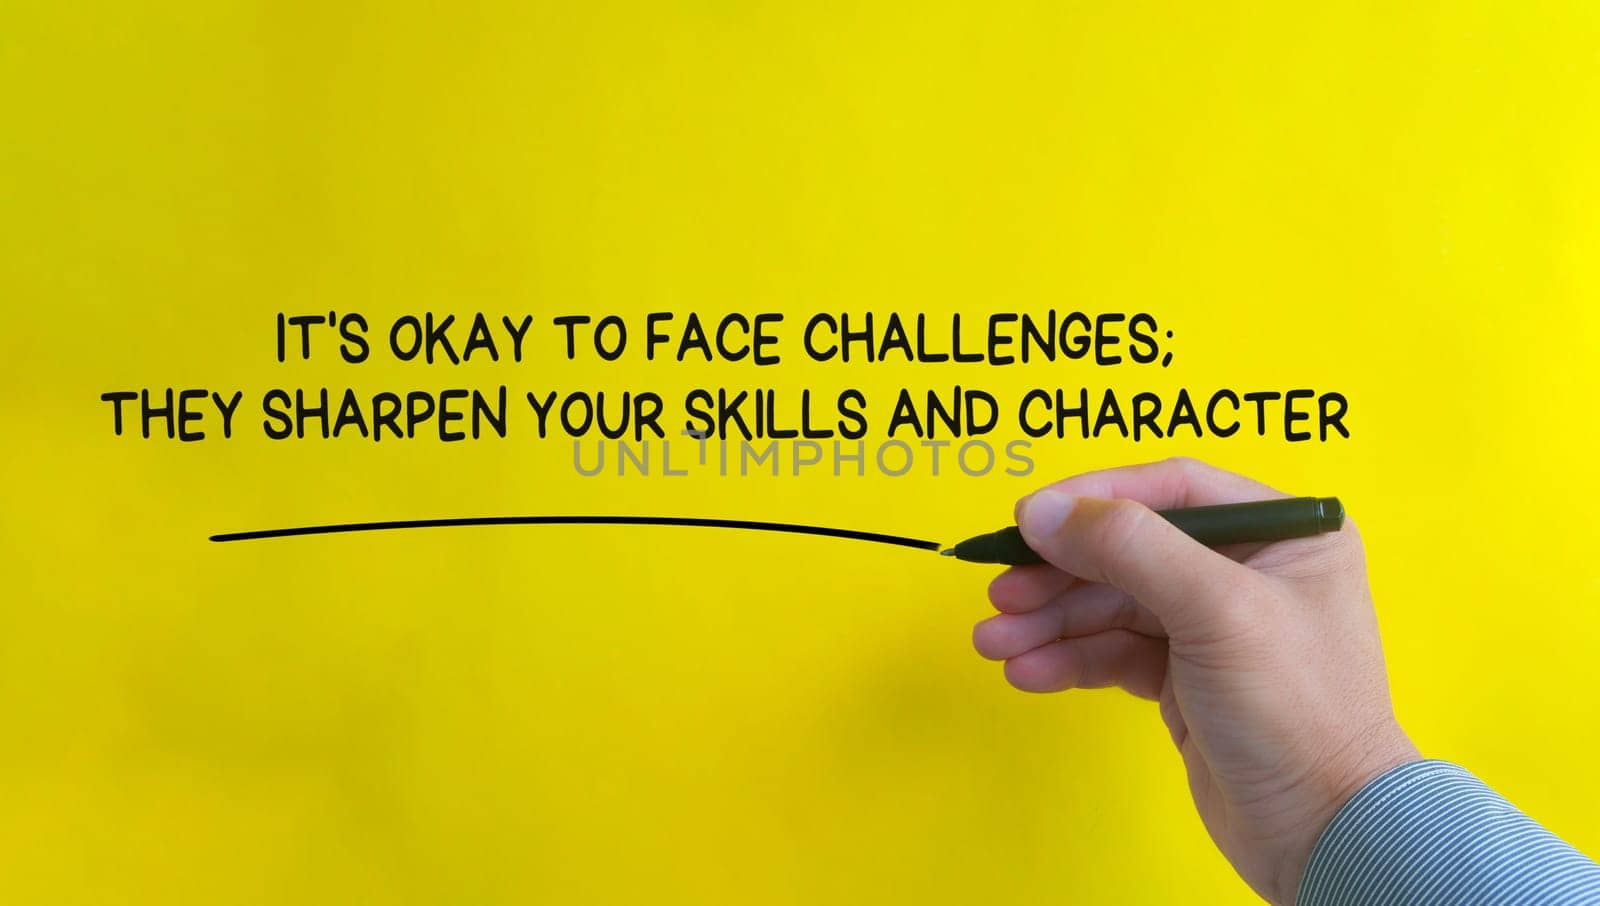 Hand writing It is okay to face challenges affirmation on yellow cover background. Affirmation concept